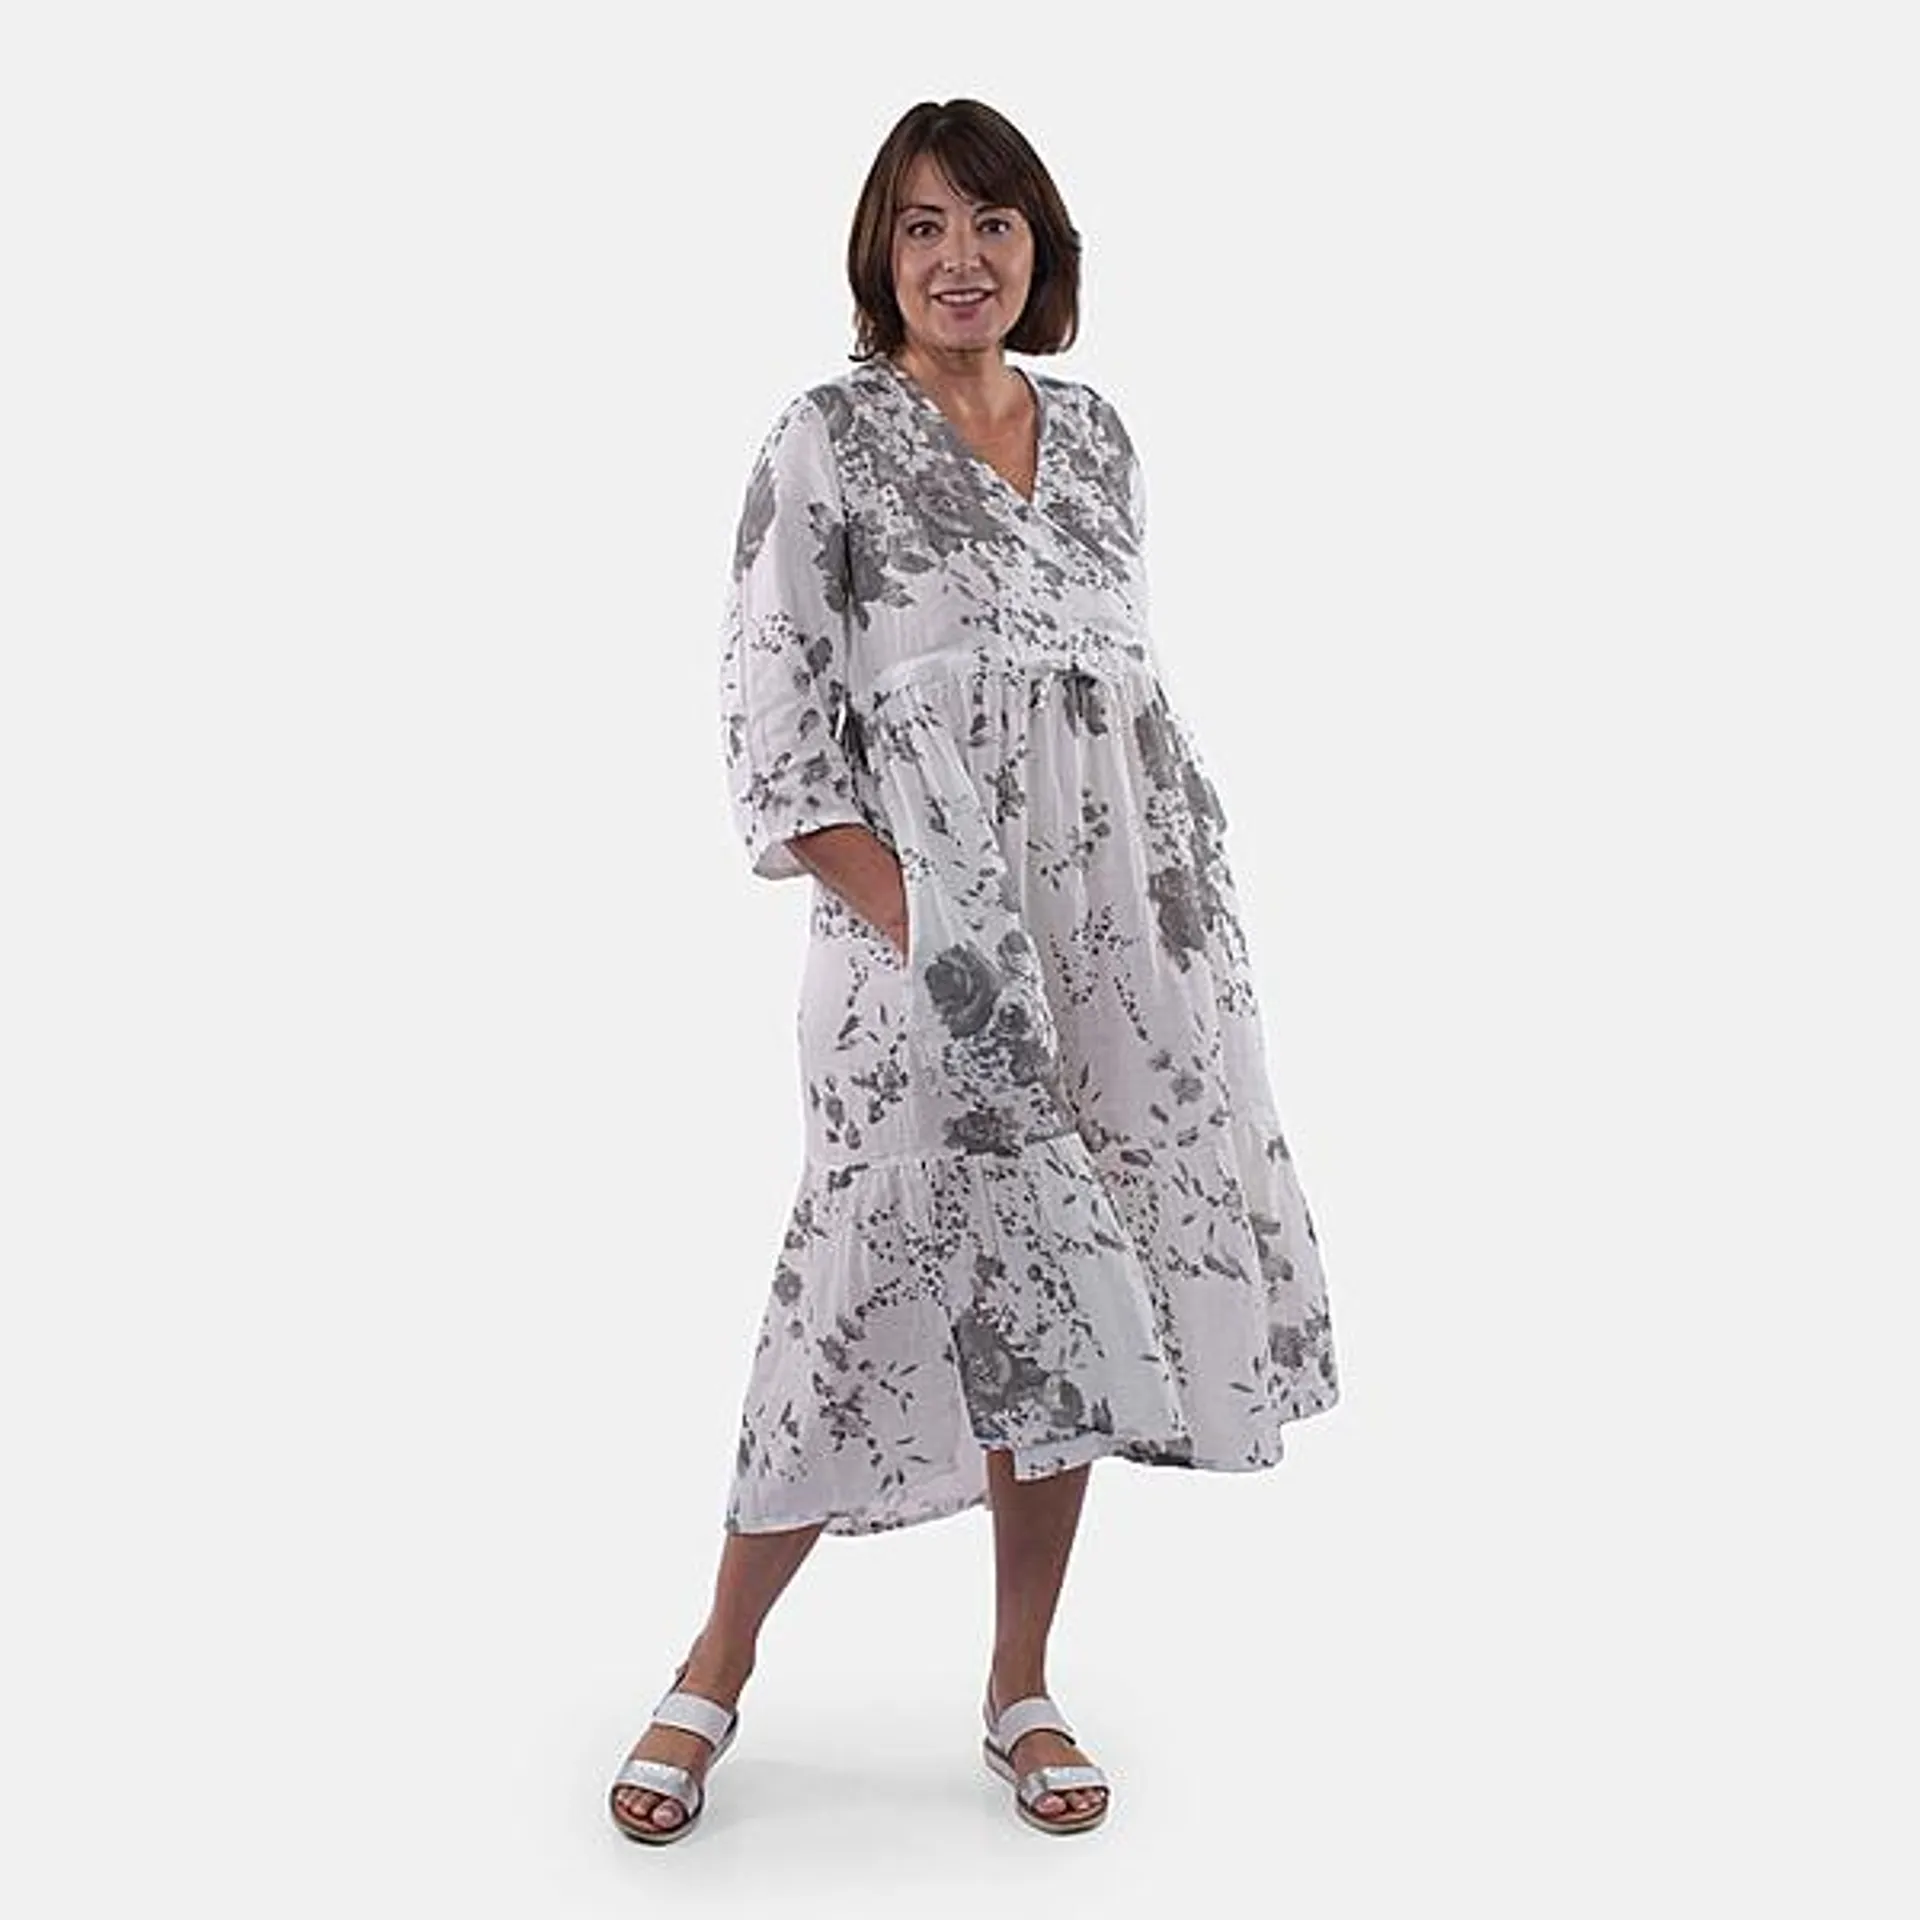 TAMSY 100% Cotton Tiered Floral Maxi Dress - Grey